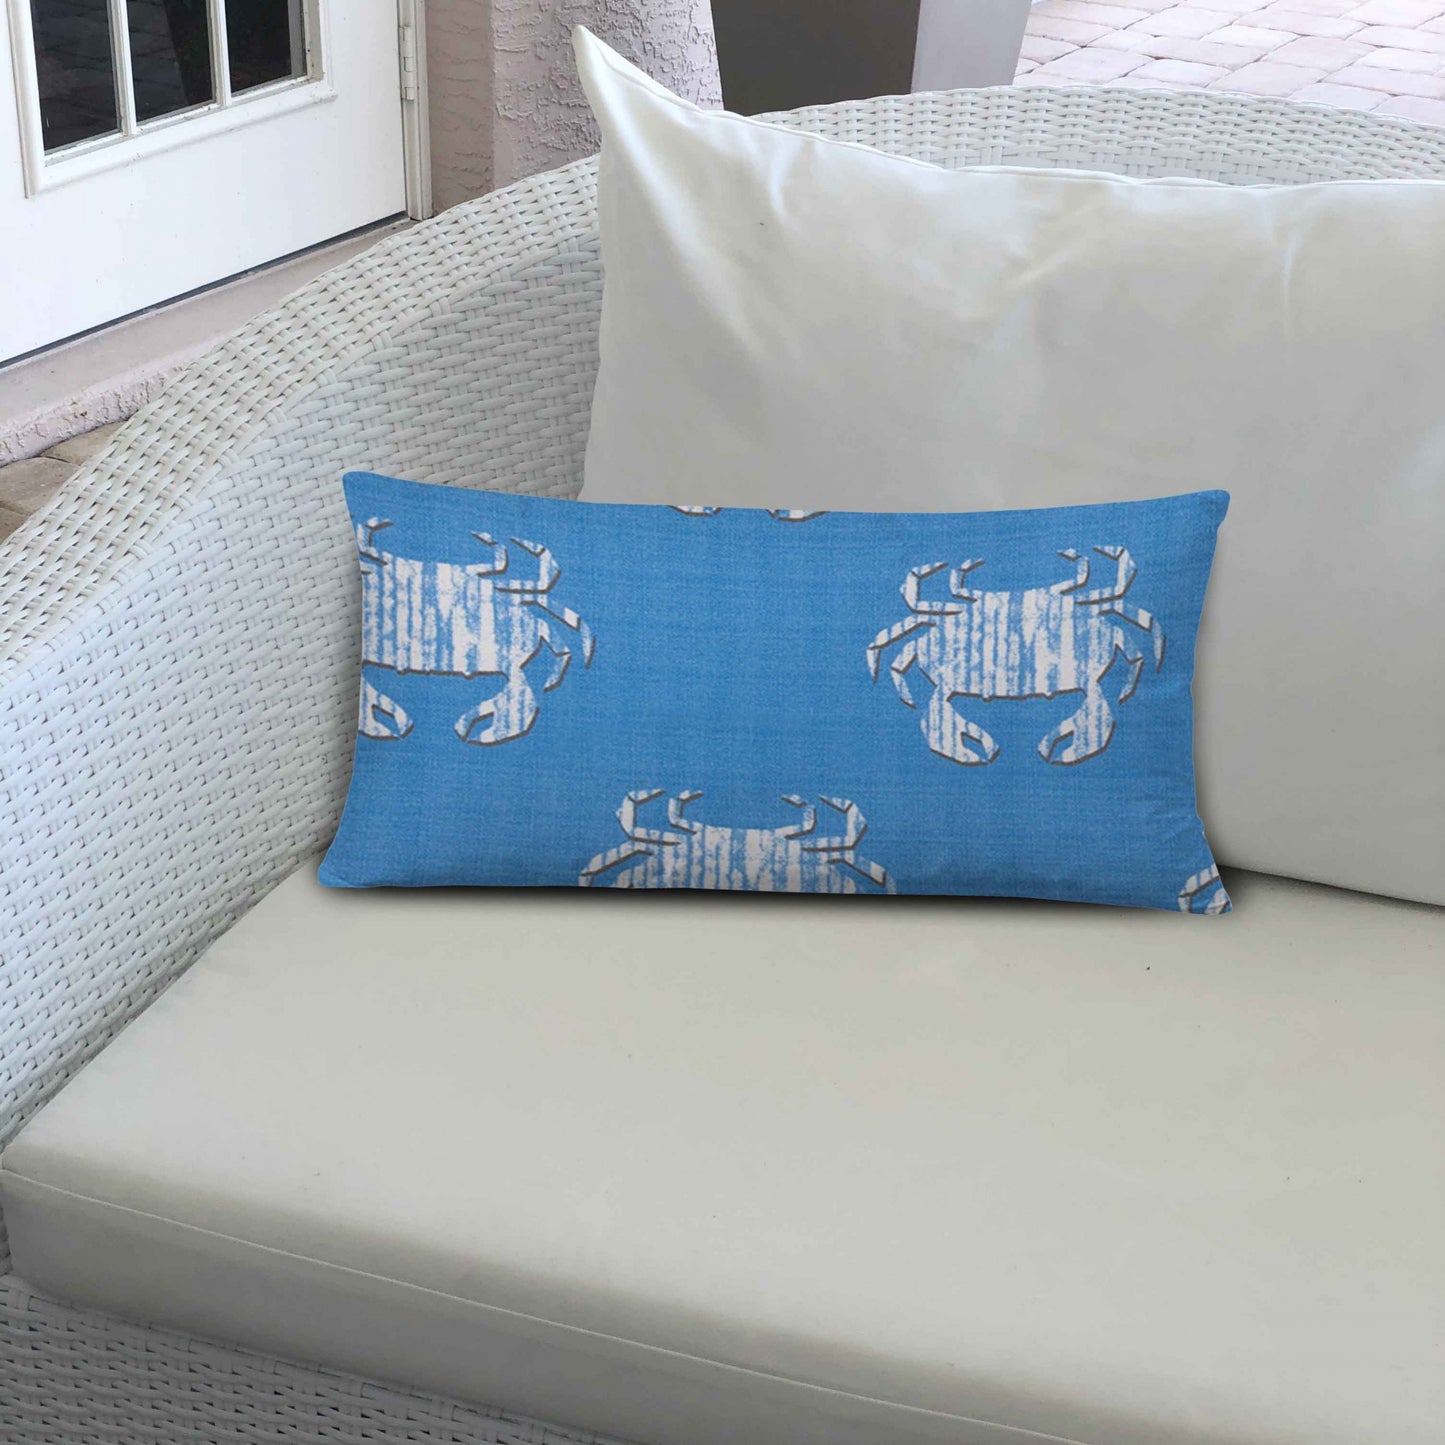 12" X 16" Blue And White Crab Enveloped Lumbar Indoor Outdoor Pillow Cover